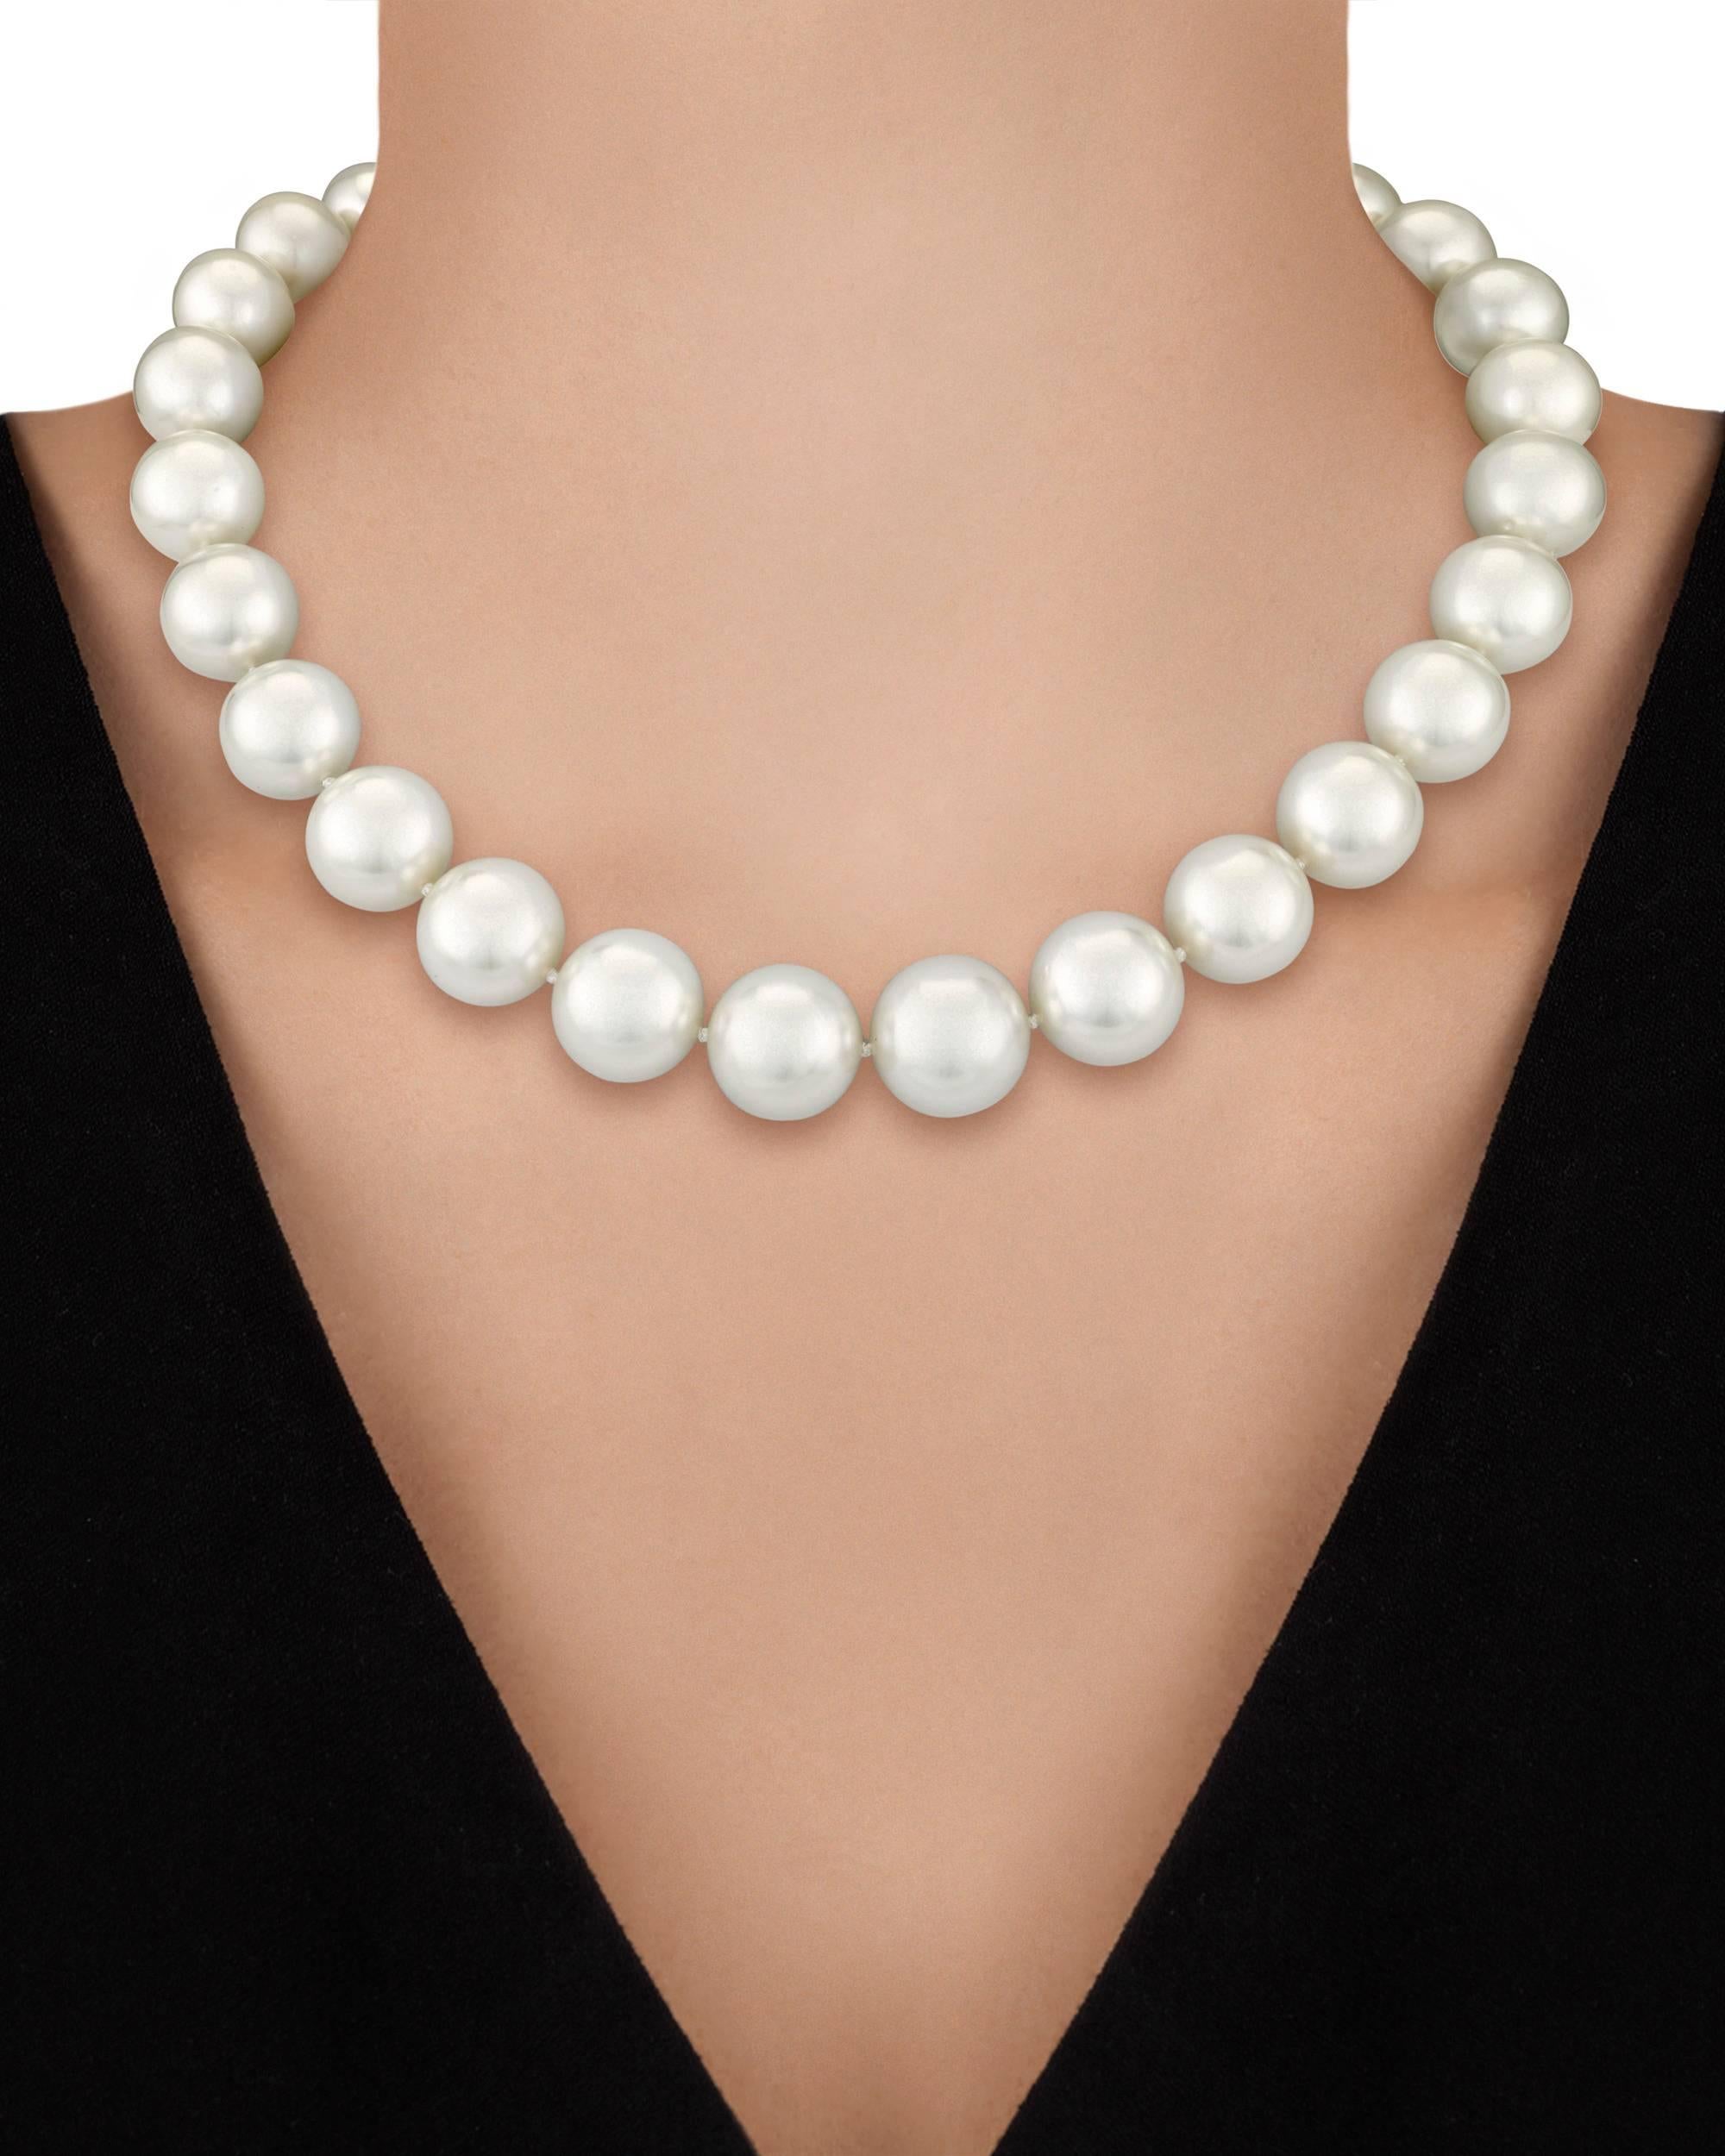 This eye-catching necklace of 27 lustrous, graduated white South Sea pearls is simply amazing. These perfectly matched, graduated orbs range in size from 14mm to 16mm, and are secured with an 18K white gold clasp studded with 0.75 ctw. of white